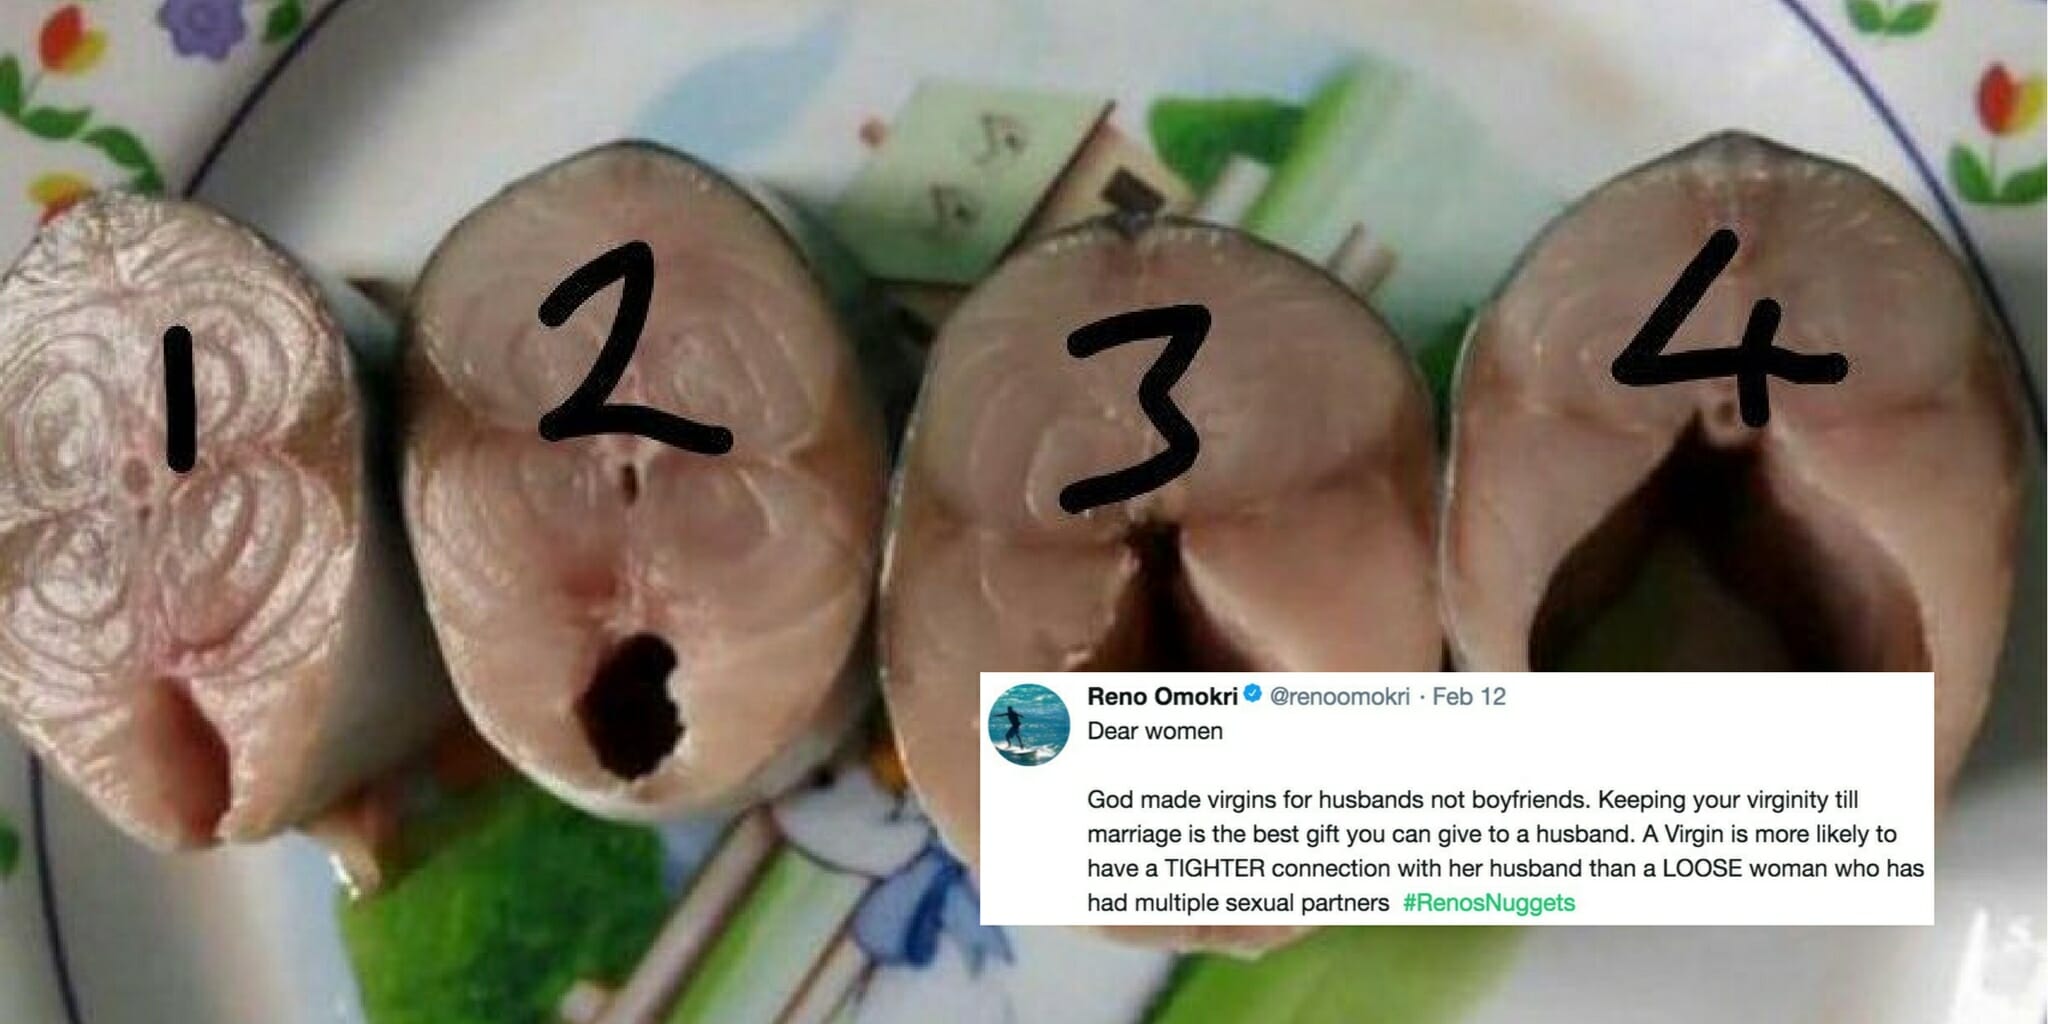 Man Uses Fish Filets To Model Stretchy Vaginas, Gets Grilled By Twitter pic